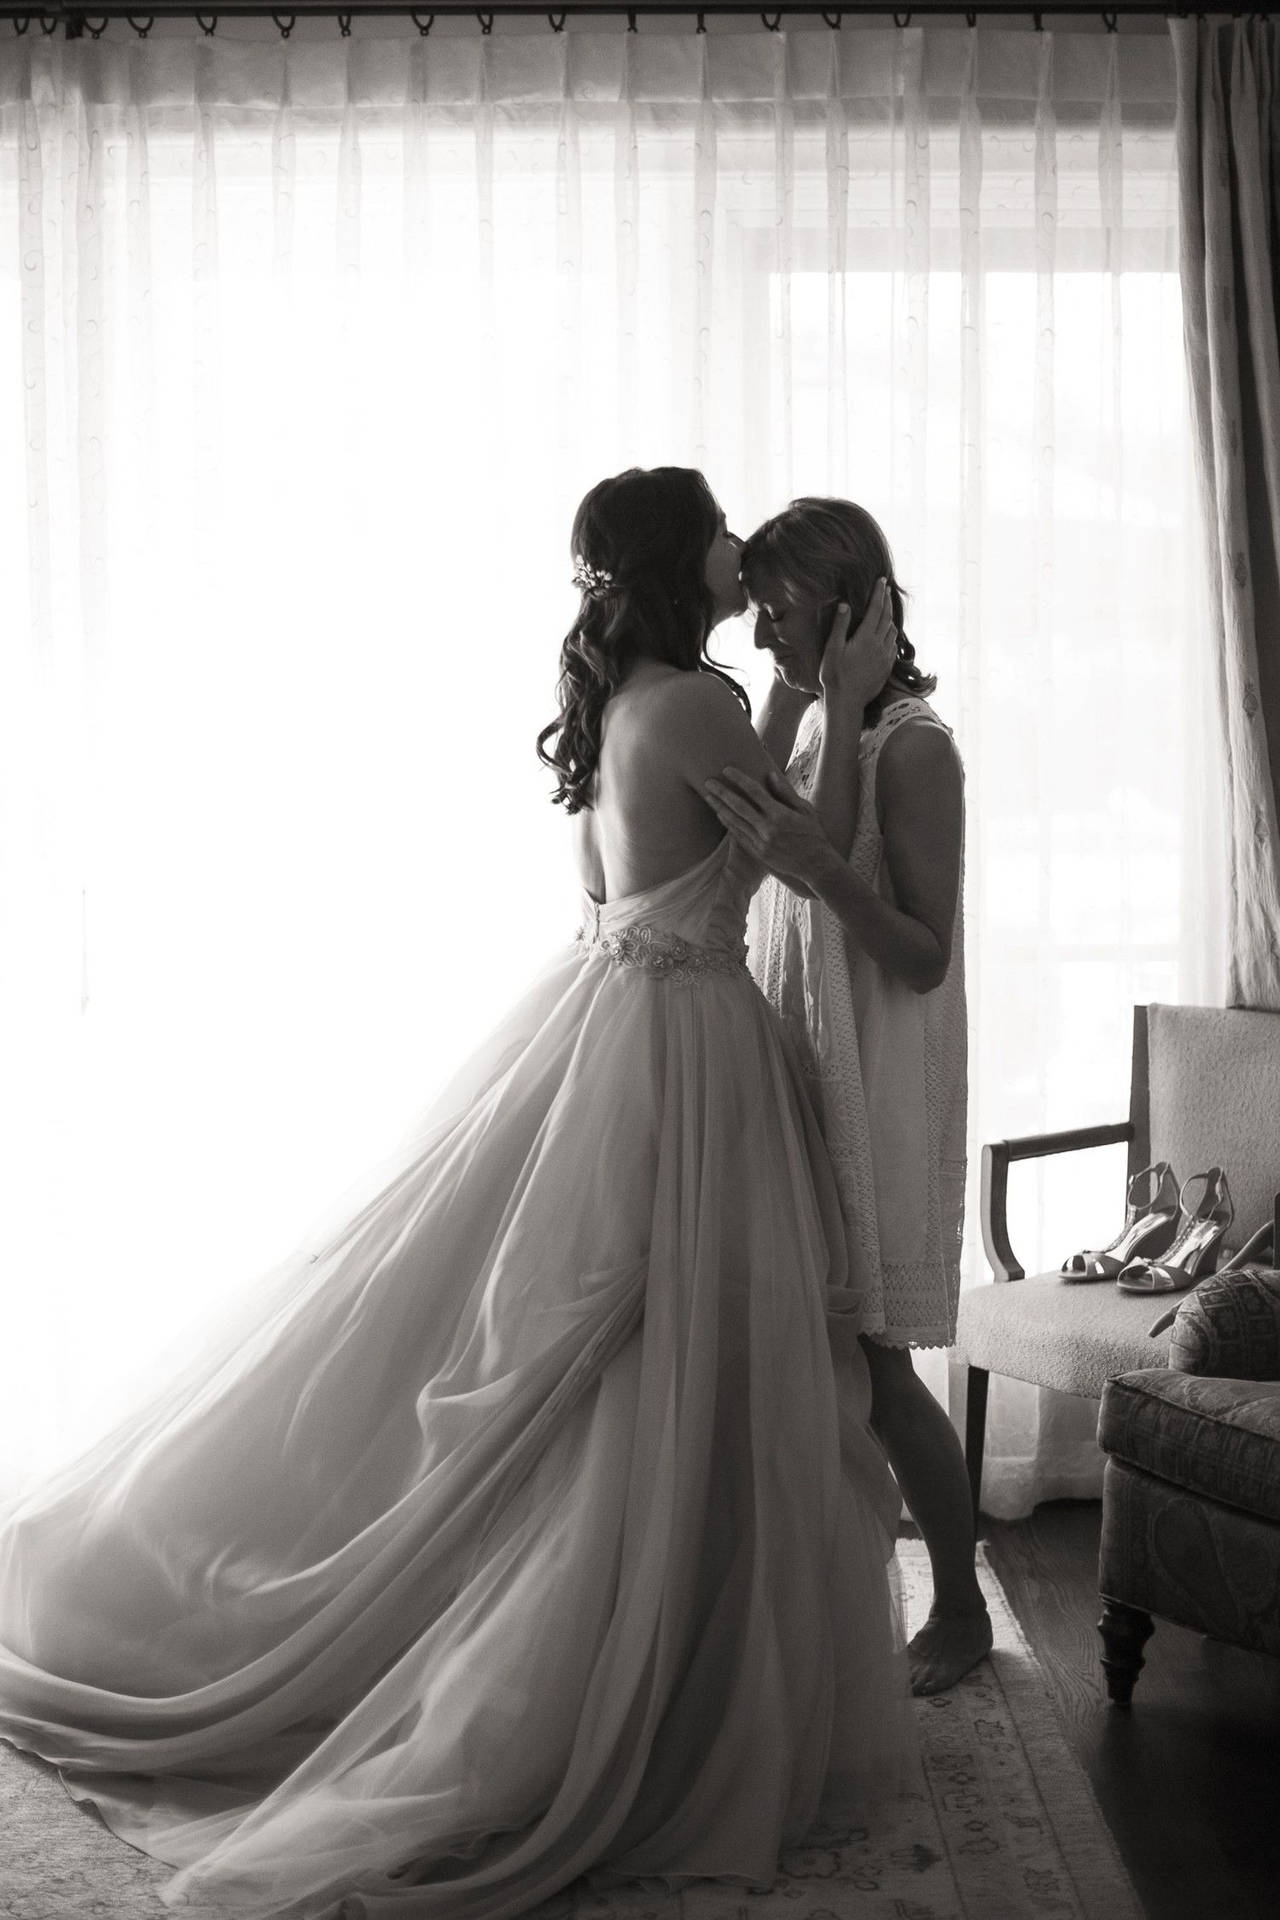 Mother And Daughter Pre-wedding Ceremony Wallpaper